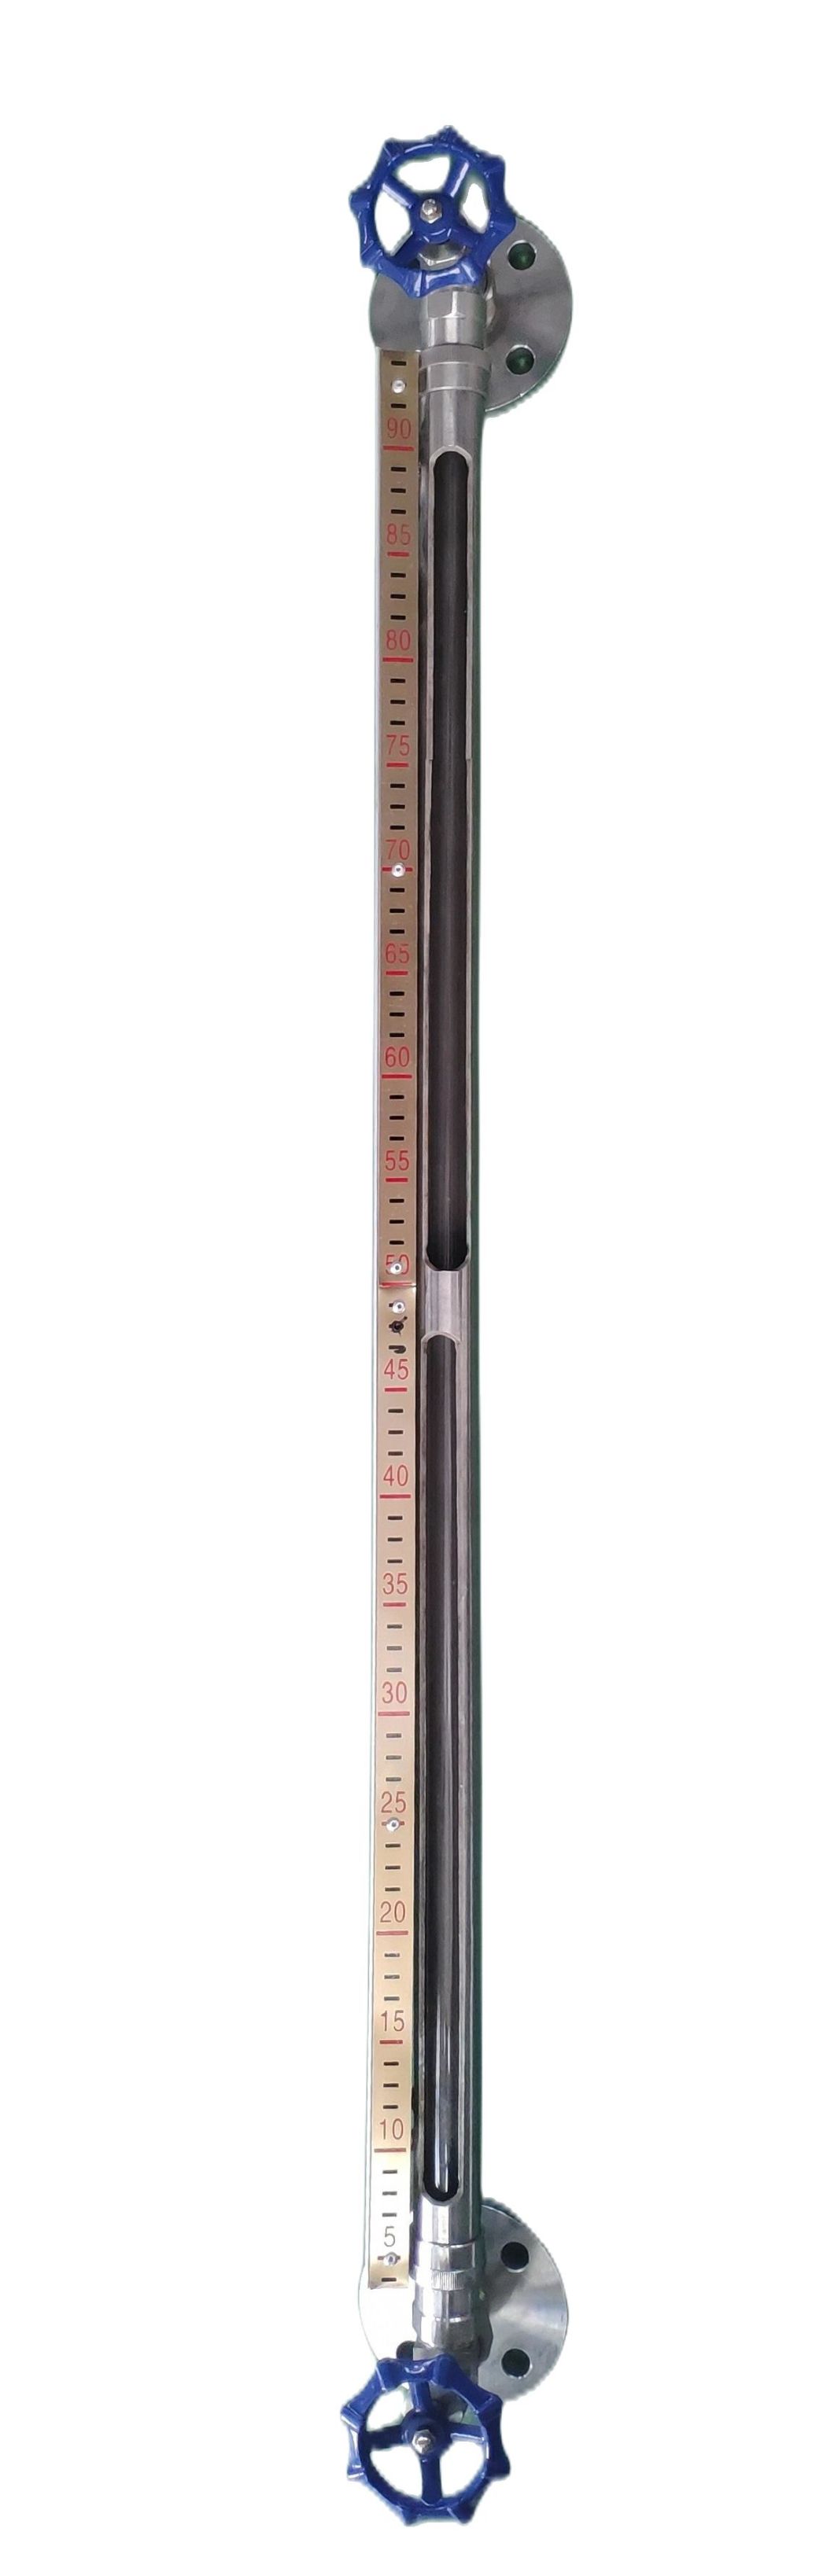 with Low Price Ulg-01 Type Tubular Type Glass Level Gauge